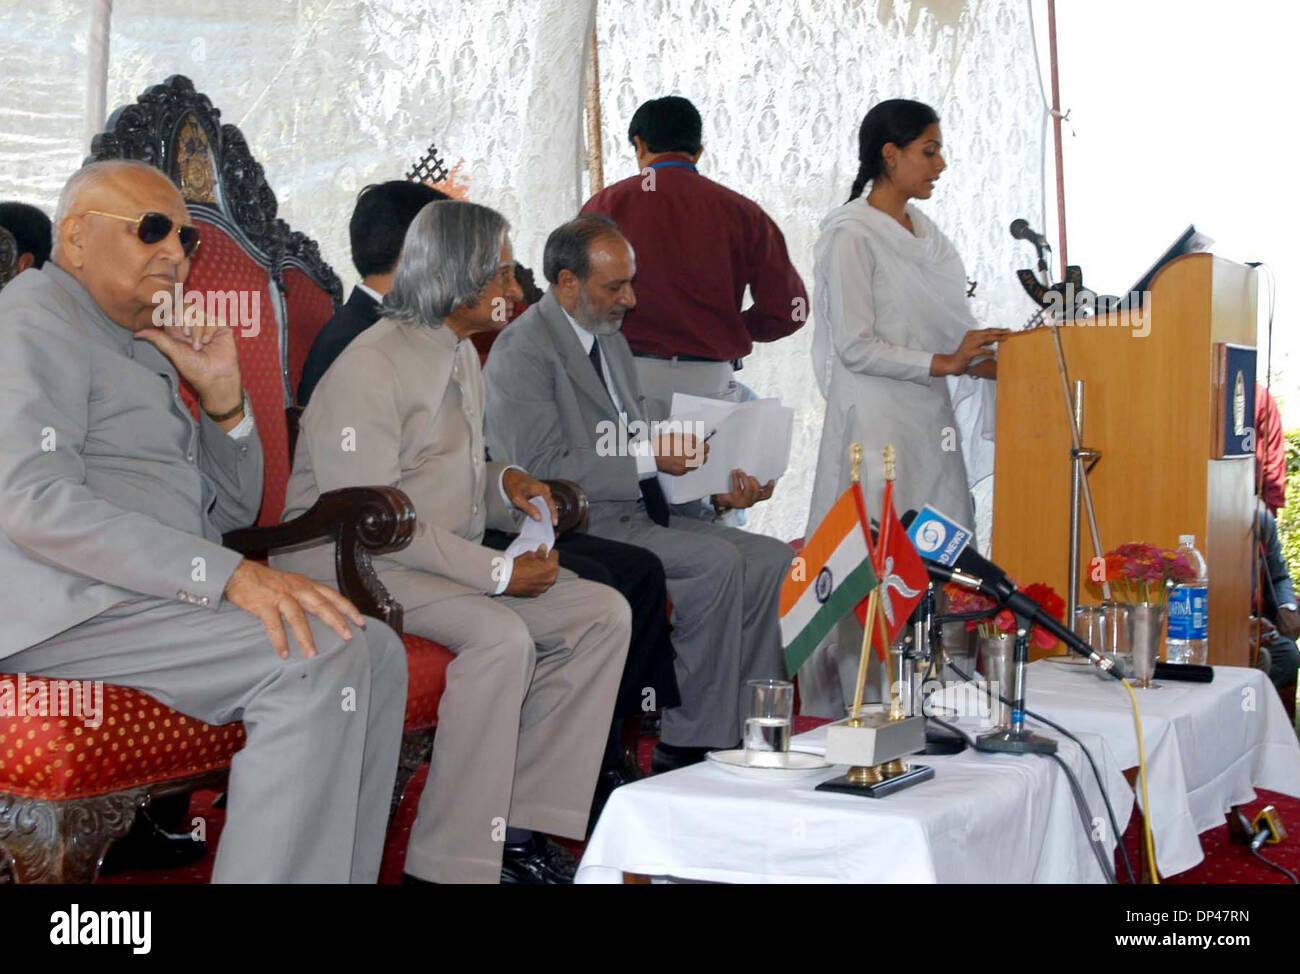 Jul 29, 2006; Srinagar, Kashmir, INDIA; Indian President A.P.J. ABDUL KALAM (front C) is flanked by Governor of JAMMU KASHMIR SK sahie (L) as he meets with school children in Srinagar, the summer capital of Indian Kashmir, Saturday, 29 July, 2006. A strike called by various separatist groups to protest the visit by the Indian President brought life to a standstill in Srinagar for a Stock Photo